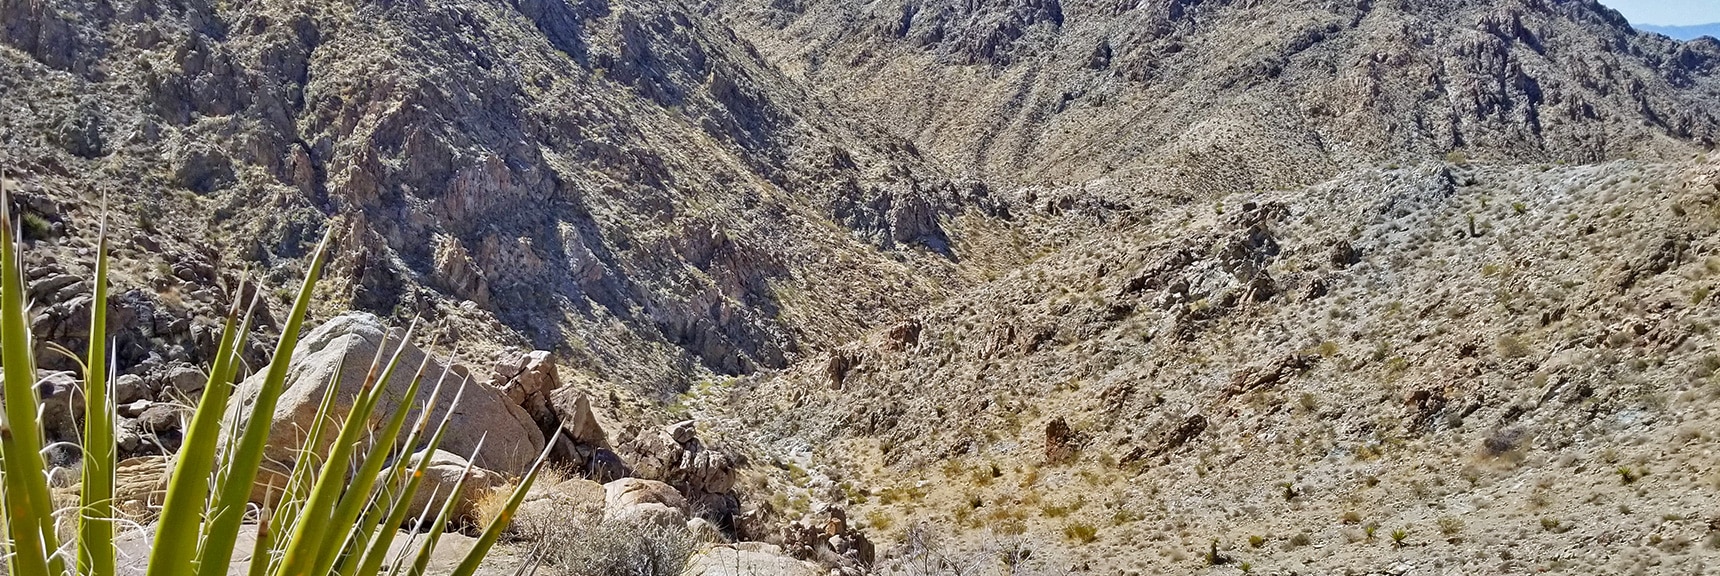 Another High View Back Down Horse Thief Canyon. | Horse Thief Canyon Loop | Mt. Wilson | Black Mountains | Lake Mead National Recreation Area, Arizona